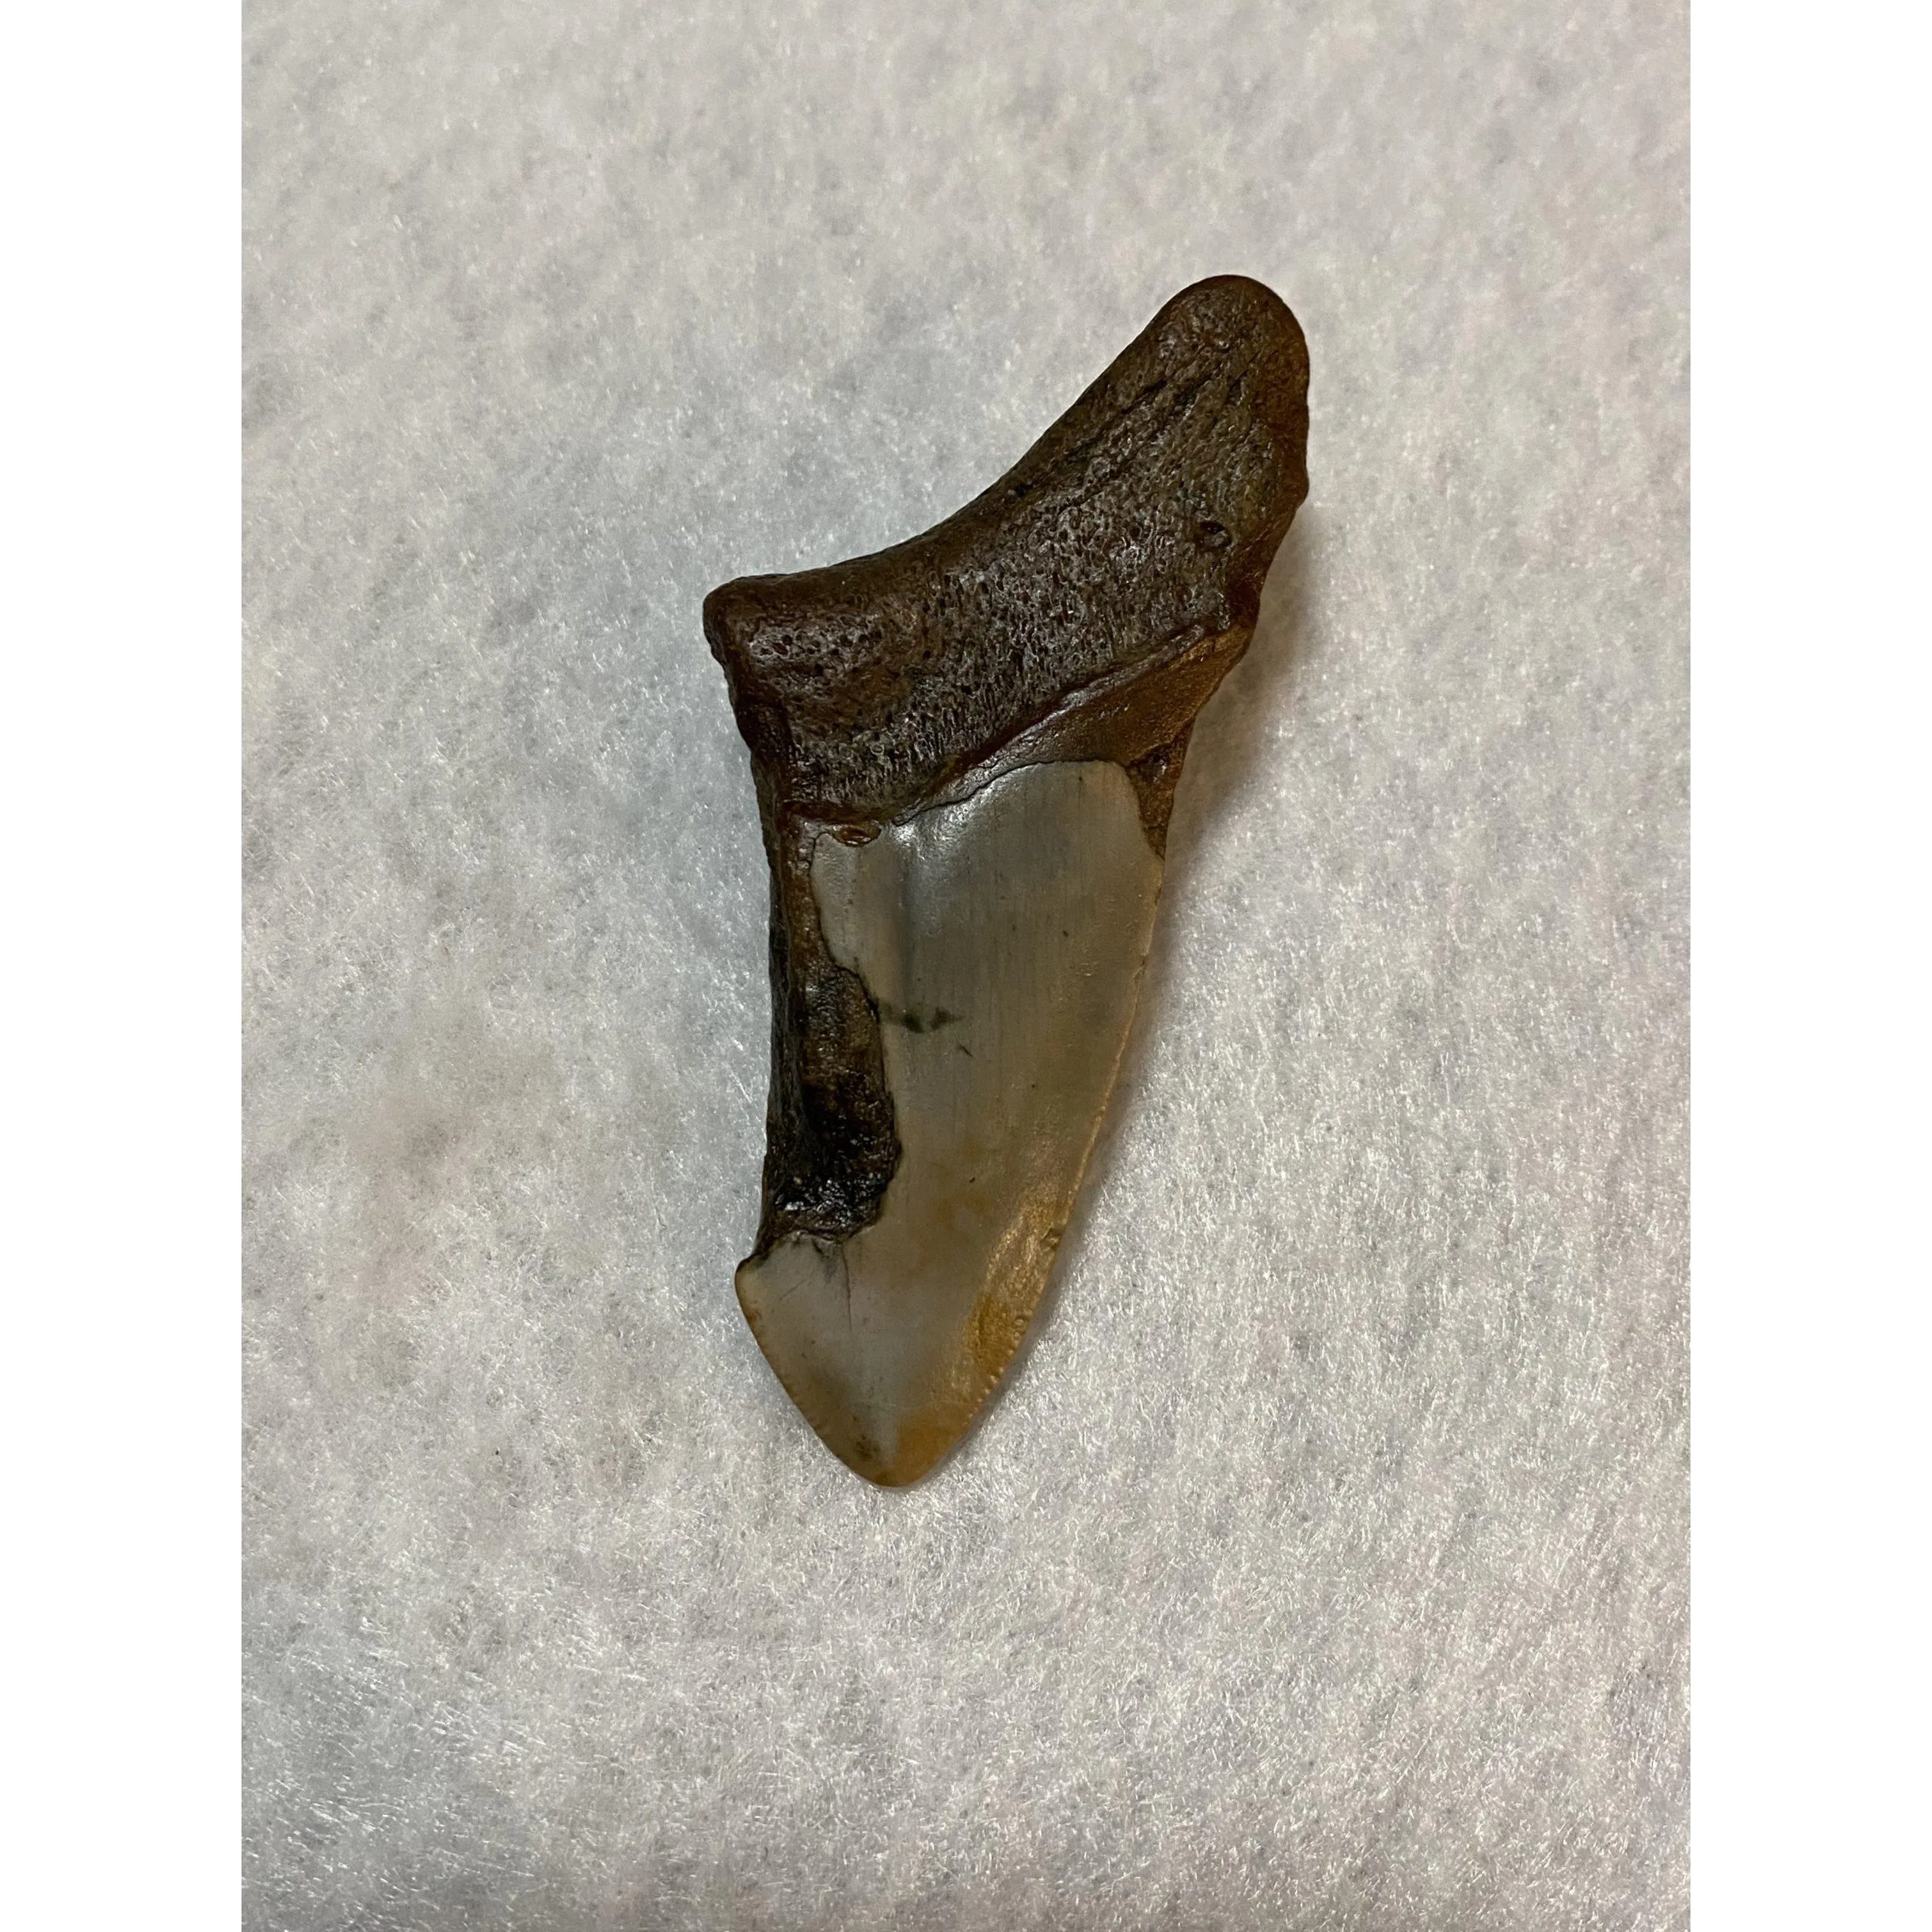 Megalodon Partial Tooth, South Carolina, 3.45 inch Prehistoric Online